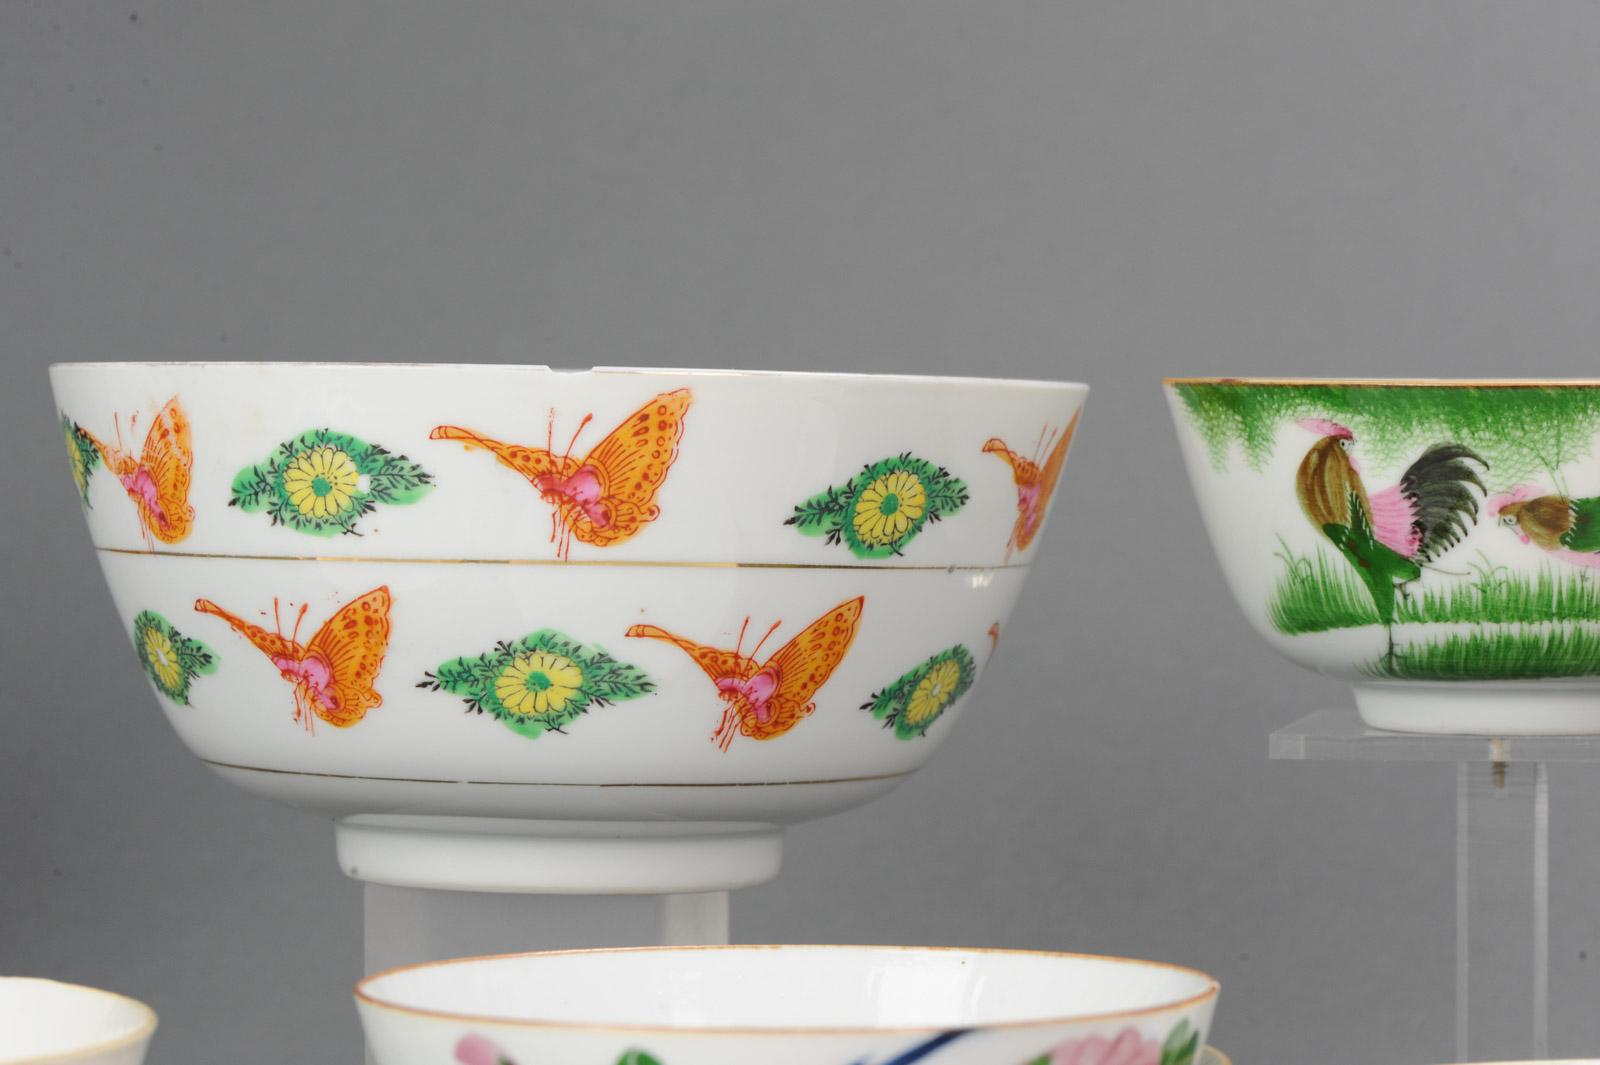 Lovely Chinese Proc Bowls with Roosters & Birds Chinese Porcelain, 1960's-70's

Nice set for dinner.

Additional information:
Material: Porcelain & Pottery
Type: Bowls
Region of Origin: China
Country of Manufacturing: China
Original/Reproduction: